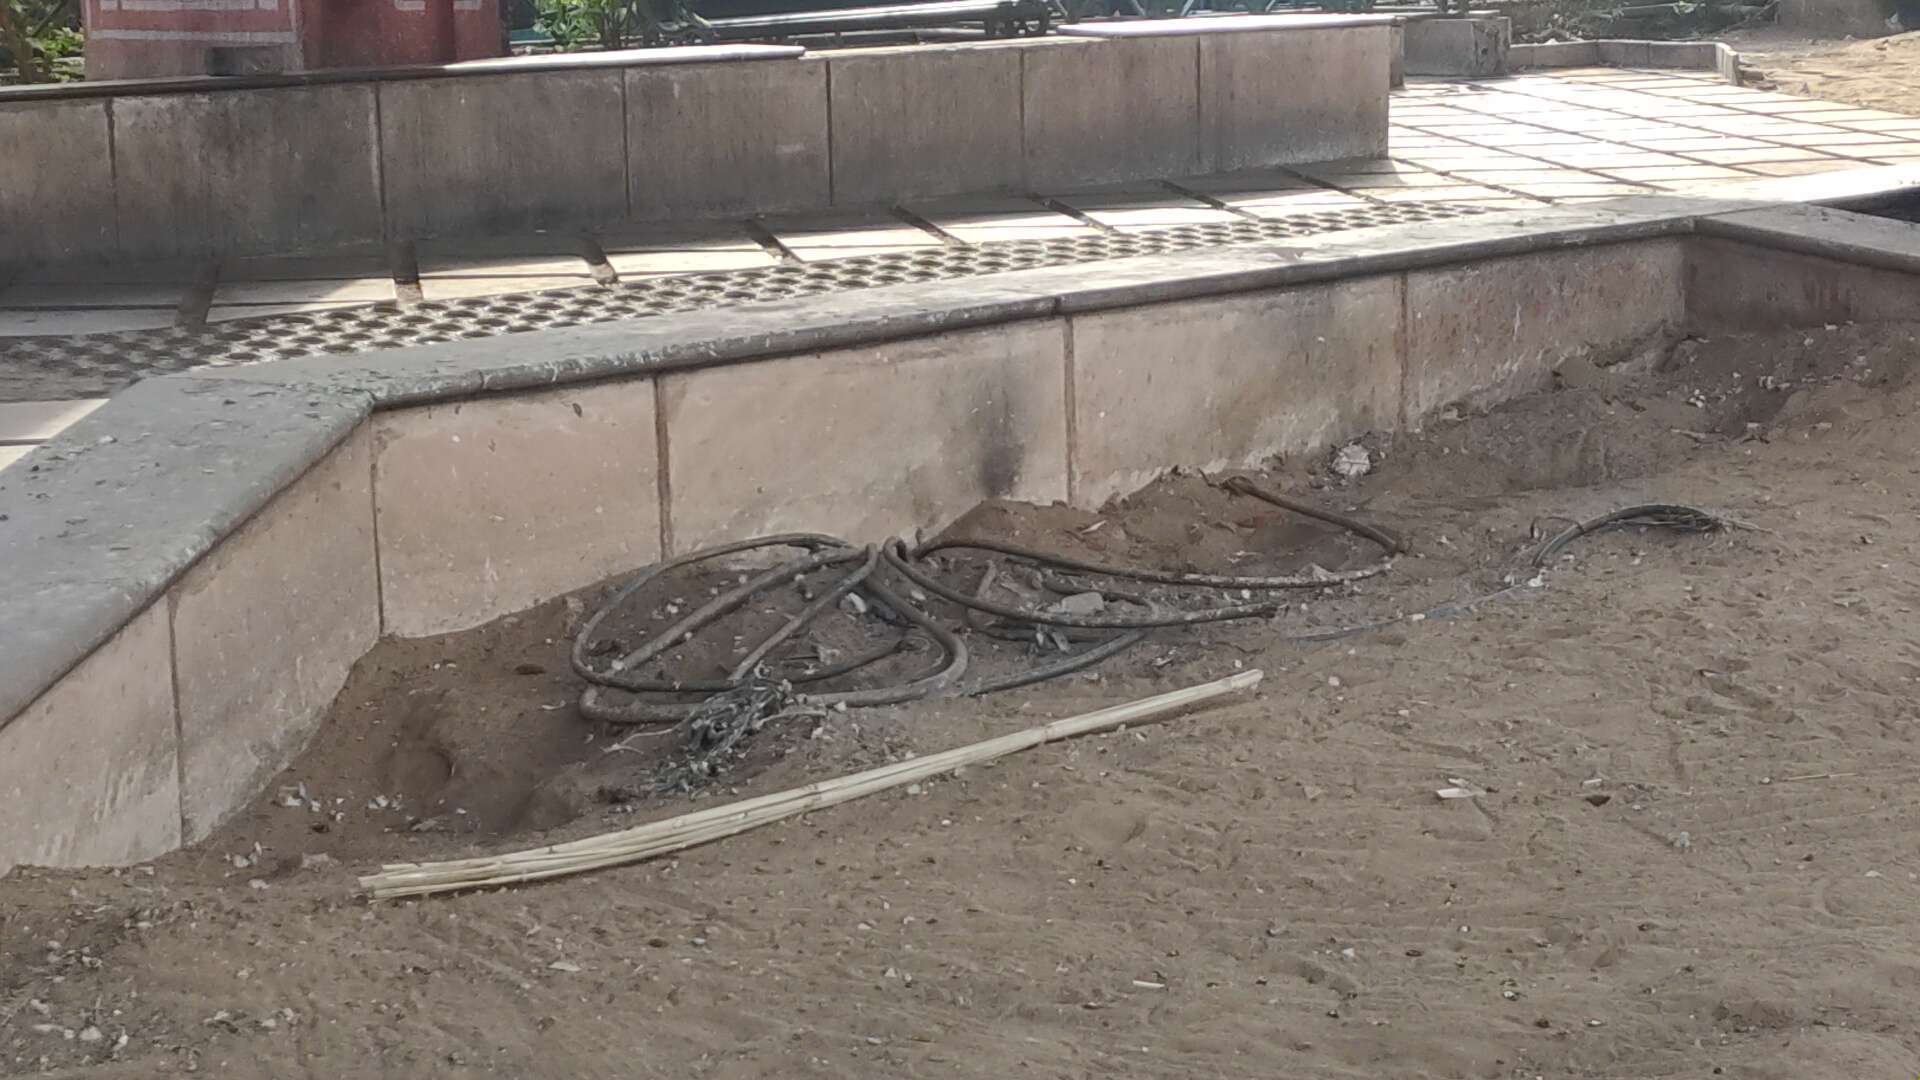 The beautification work done under Sanganer culvert is now ruined